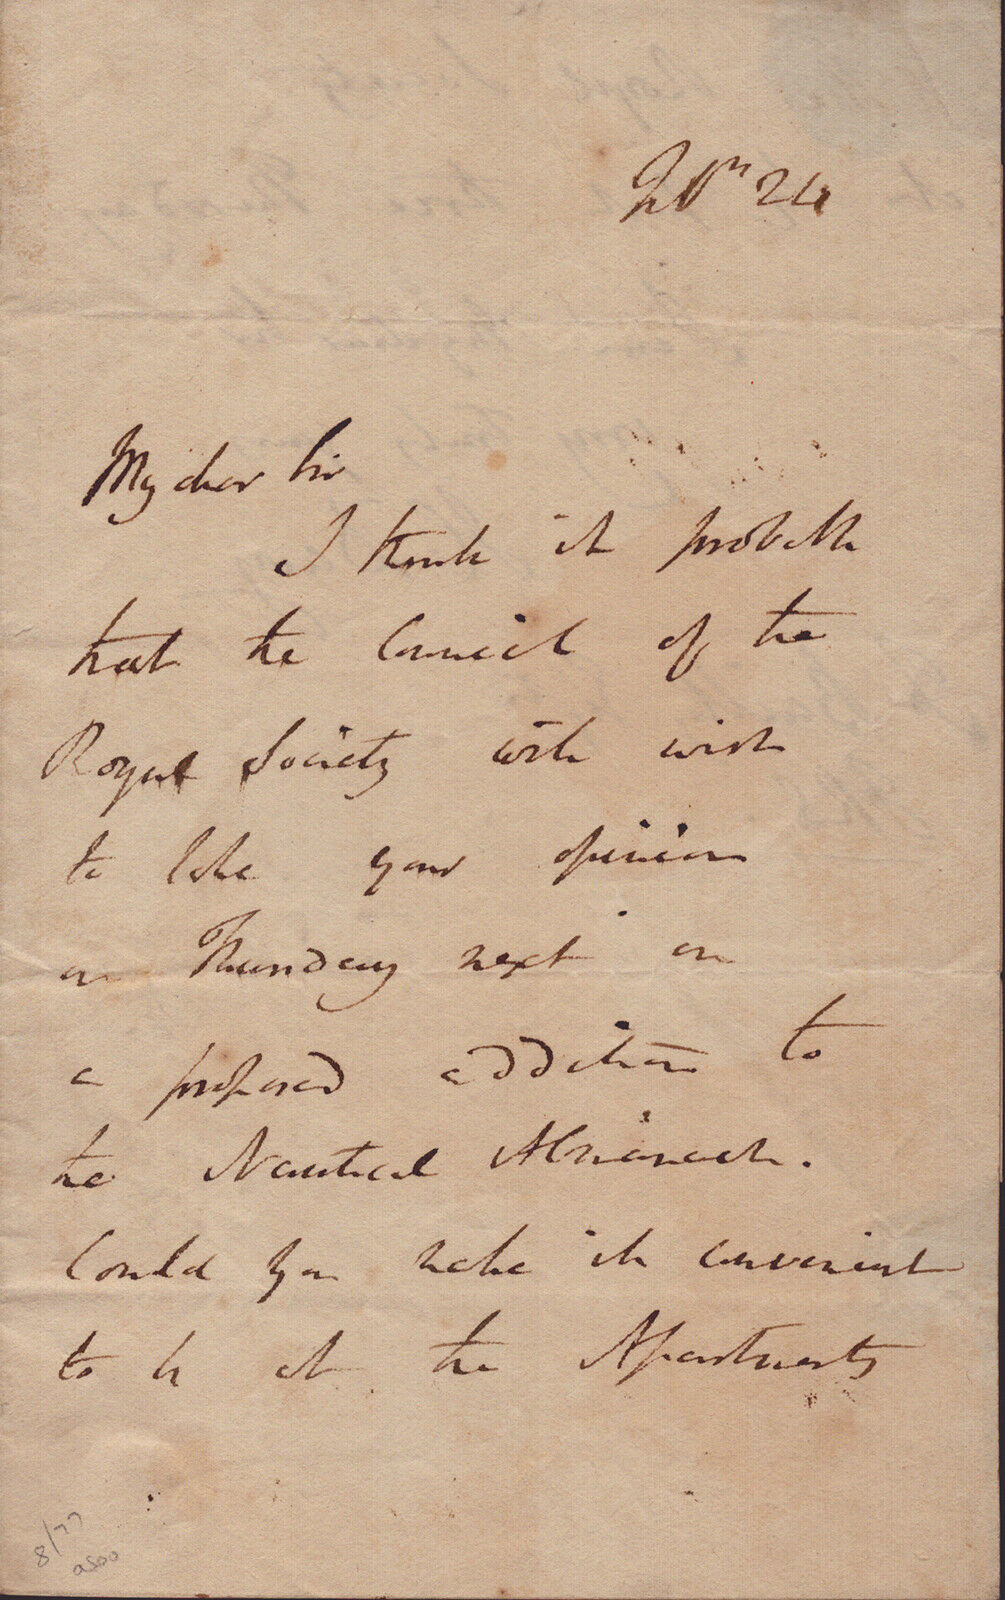 SIR HUMPHRY DAVY - AUTOGRAPH LETTER SIGNED 2/24